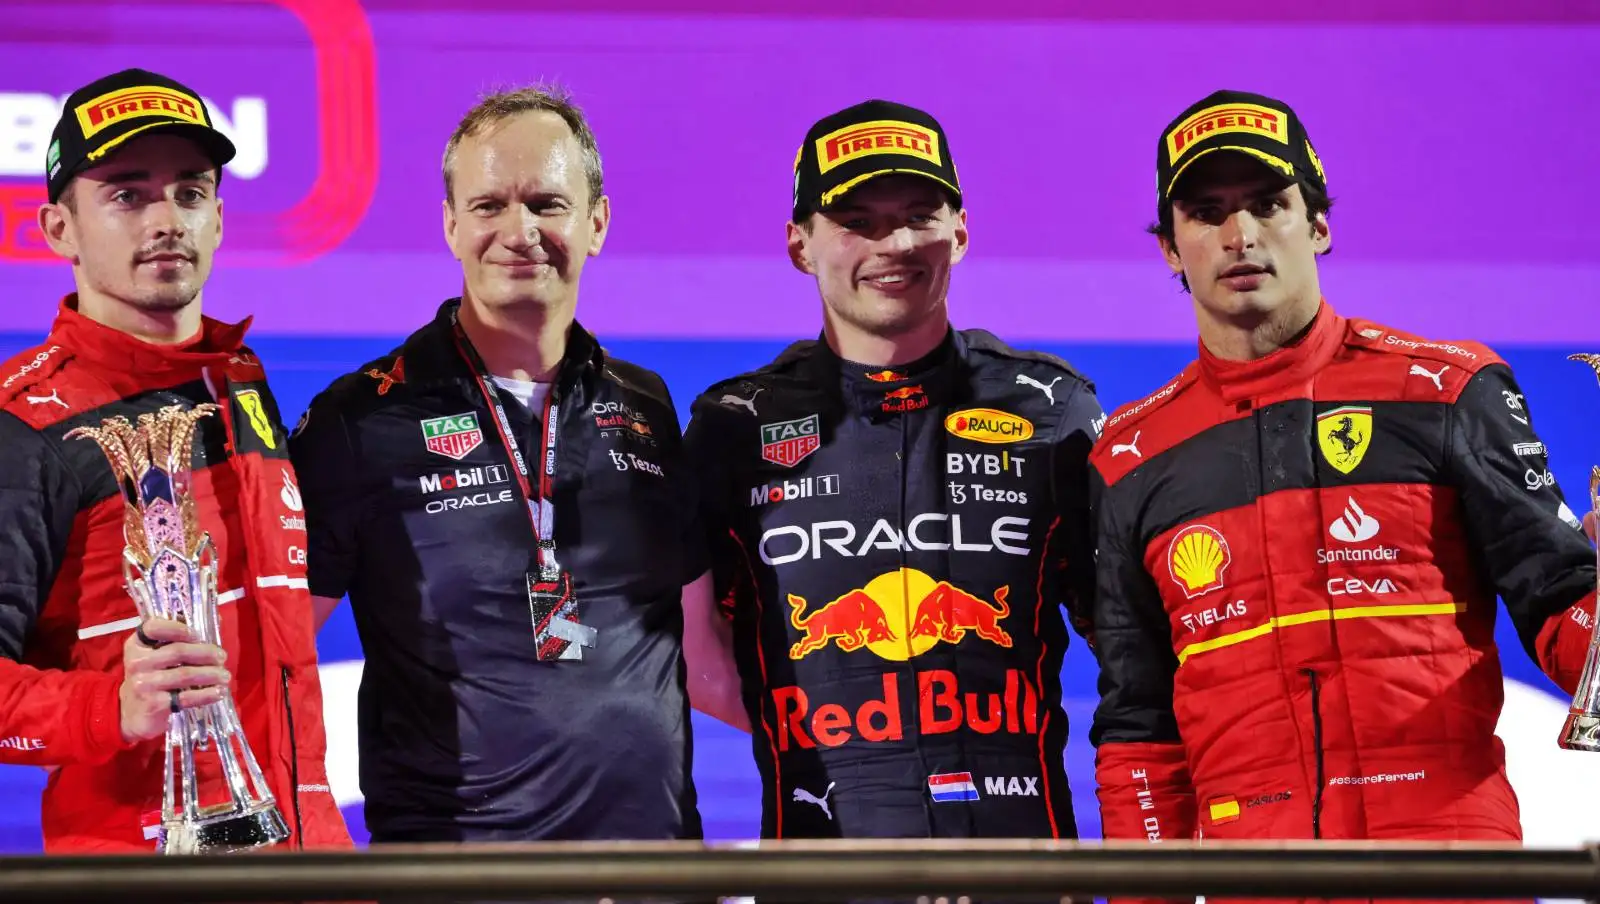 Max Verstappen, Charles Leclerc, Carlos Sainz and Paul Monaghan on the podium. Jeddah March 2022.